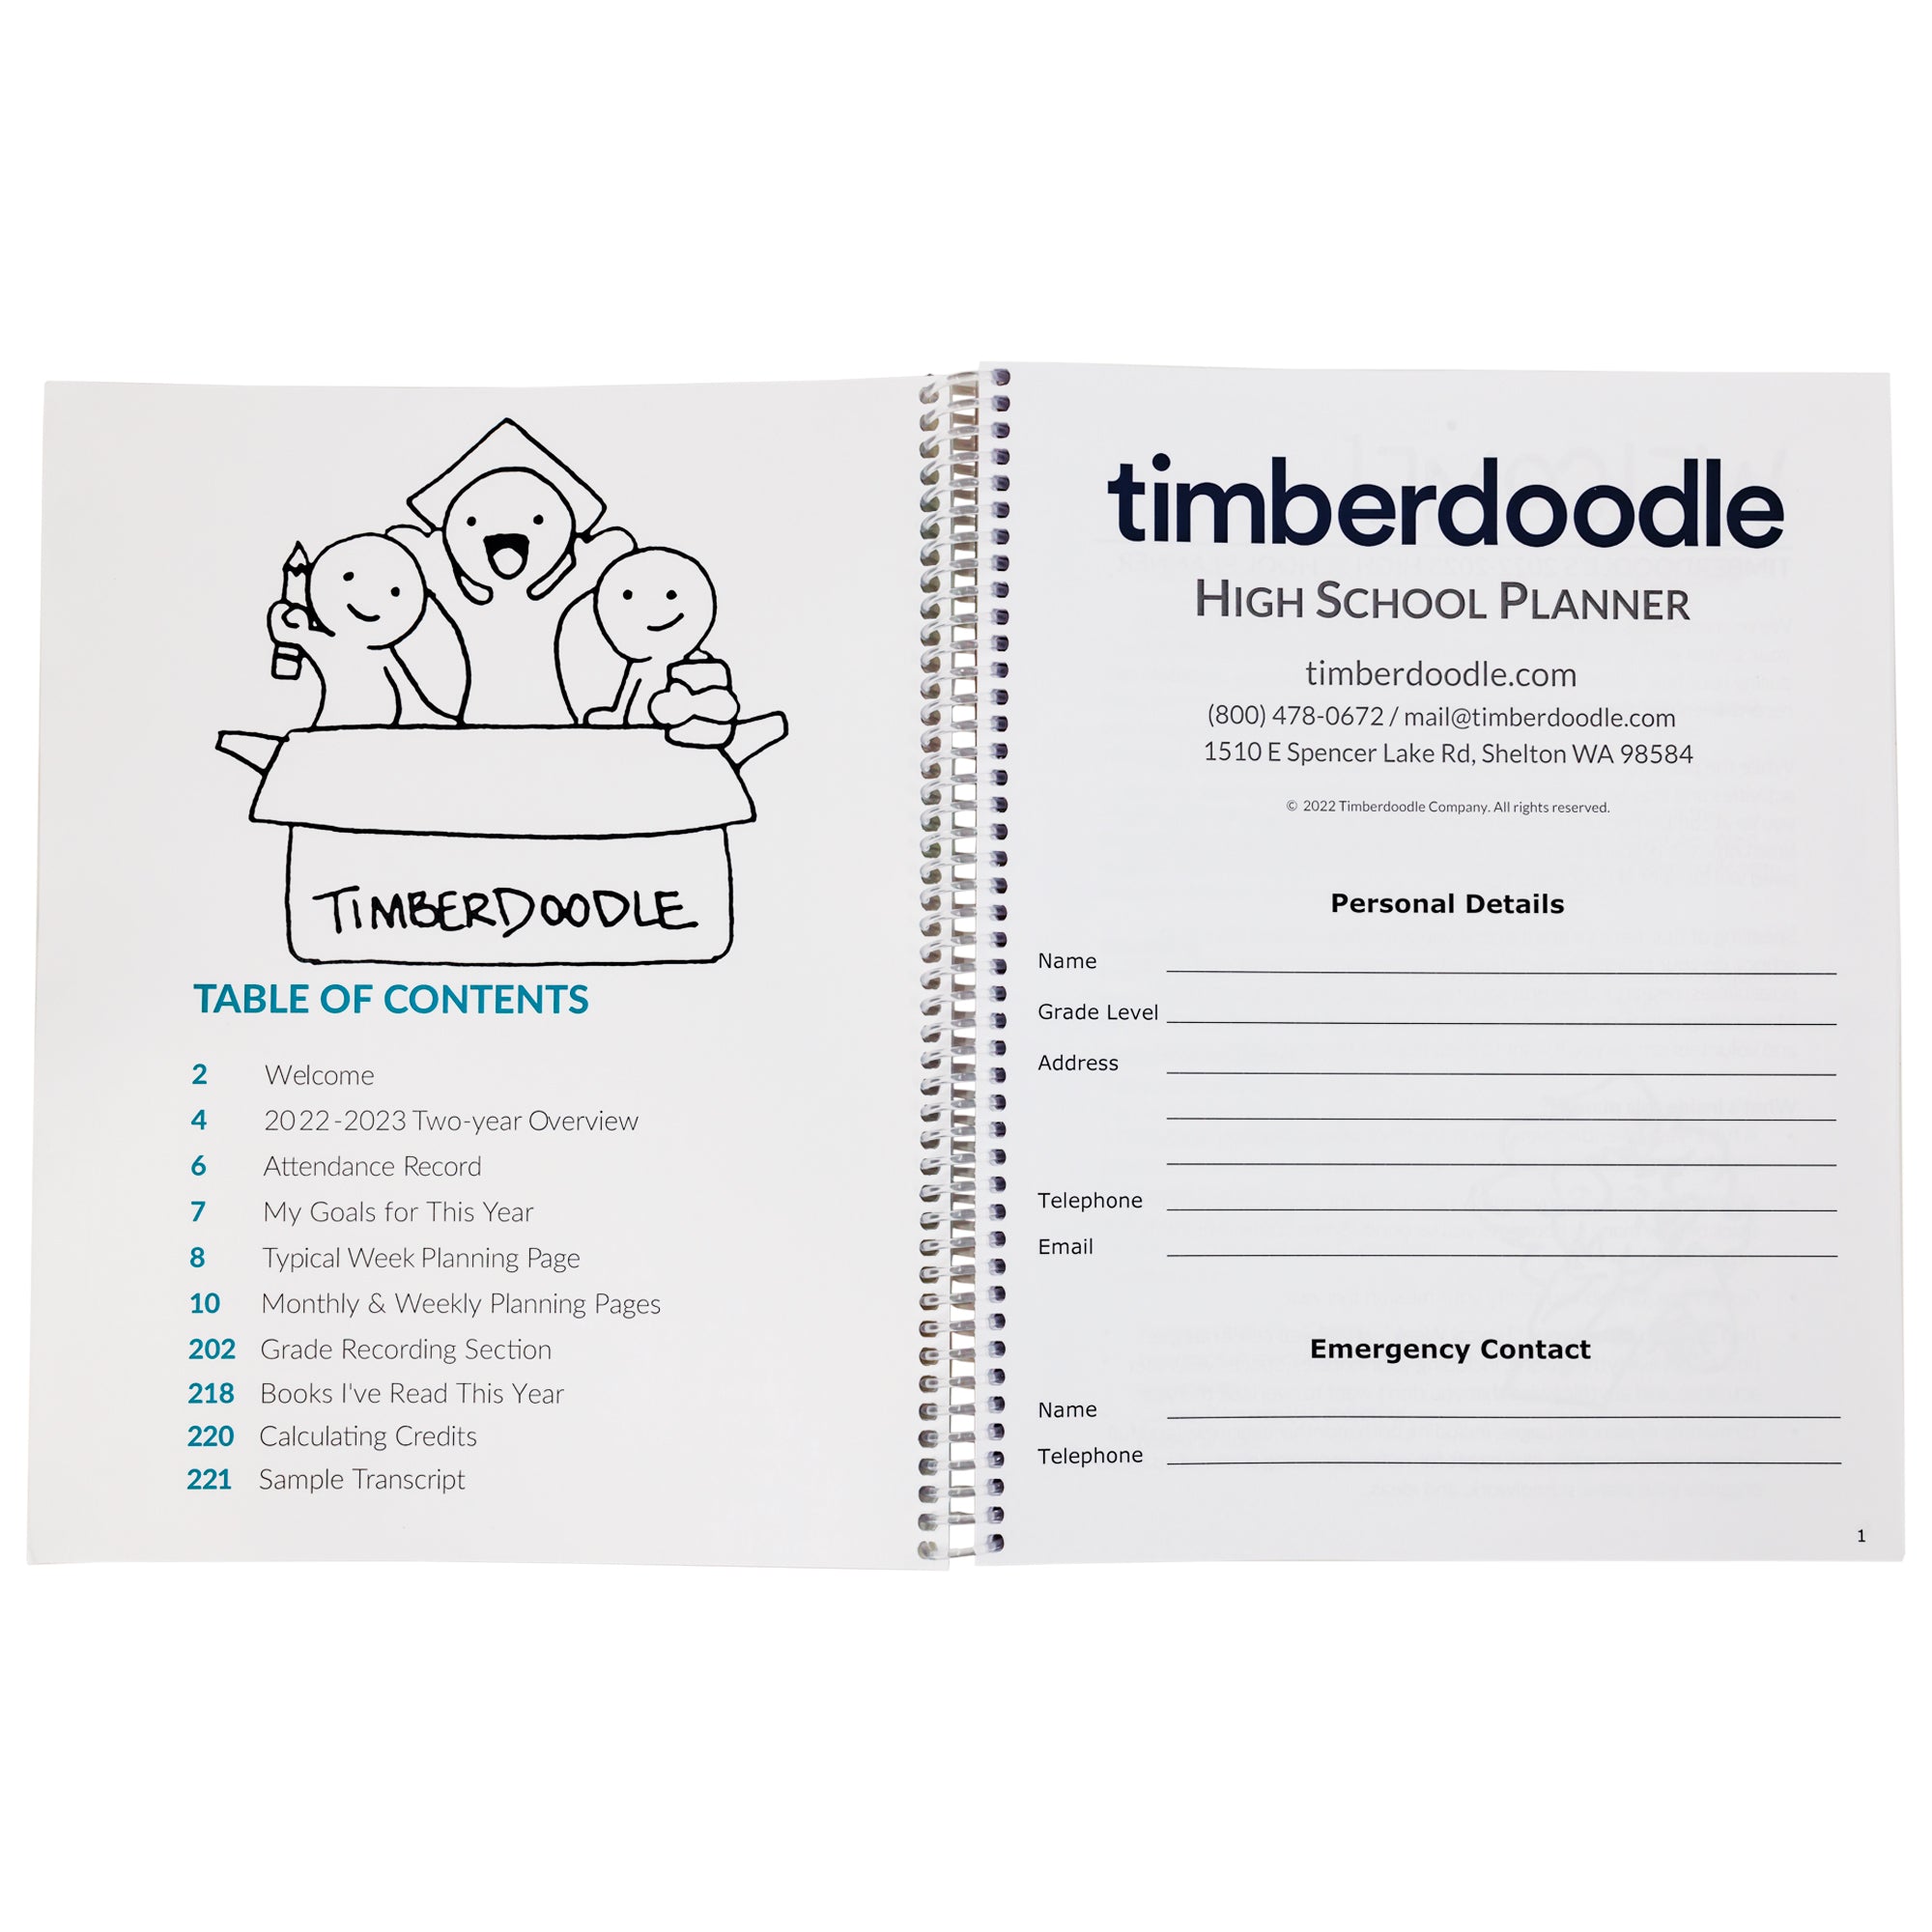 The Timberdoodle 2022 to 2023 High School Planner open to show the table of contents. On the top of the left page, there is a doodle drawn by a customer of 3 children jumping out of a Timberdoodle box. The Table of Contents title and page numbers are teal. The right page shows The book title, Timberdoodle info, spots for personal details, and a spots for emergency contacts.